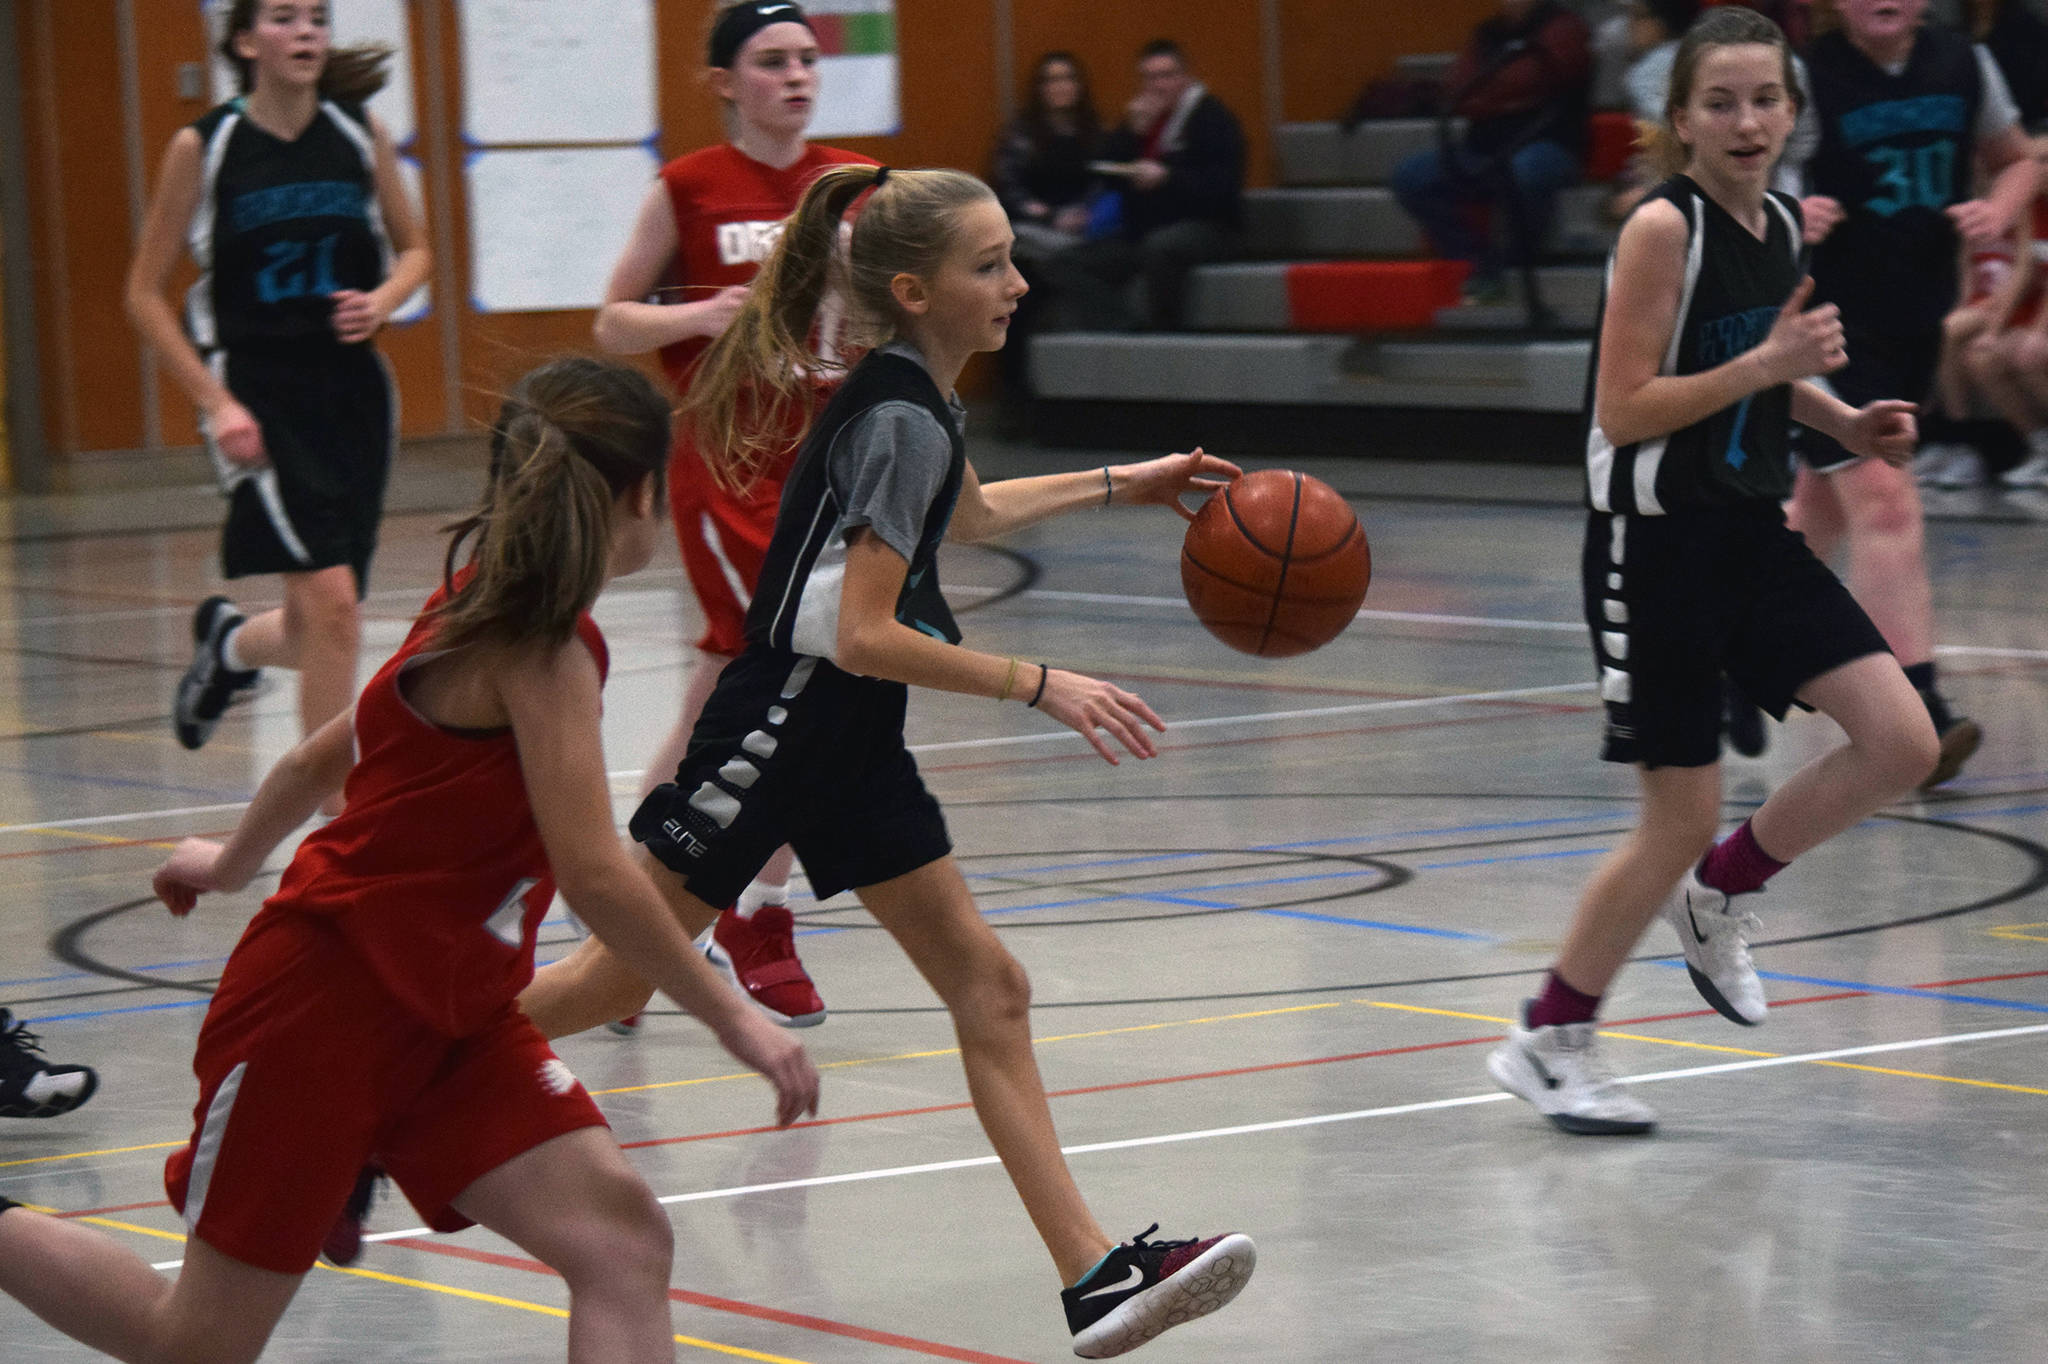 Dzantik’i Heeni’s Rayna Tuckwood pushes the ball as teammate Jenna Dobson, far right, keeps pace during a round-robin game at the Icebreaker Tournament at FDMS on Friday, Dec. 6, 2019. (Nolin Ainsworth | Juneau Empire)